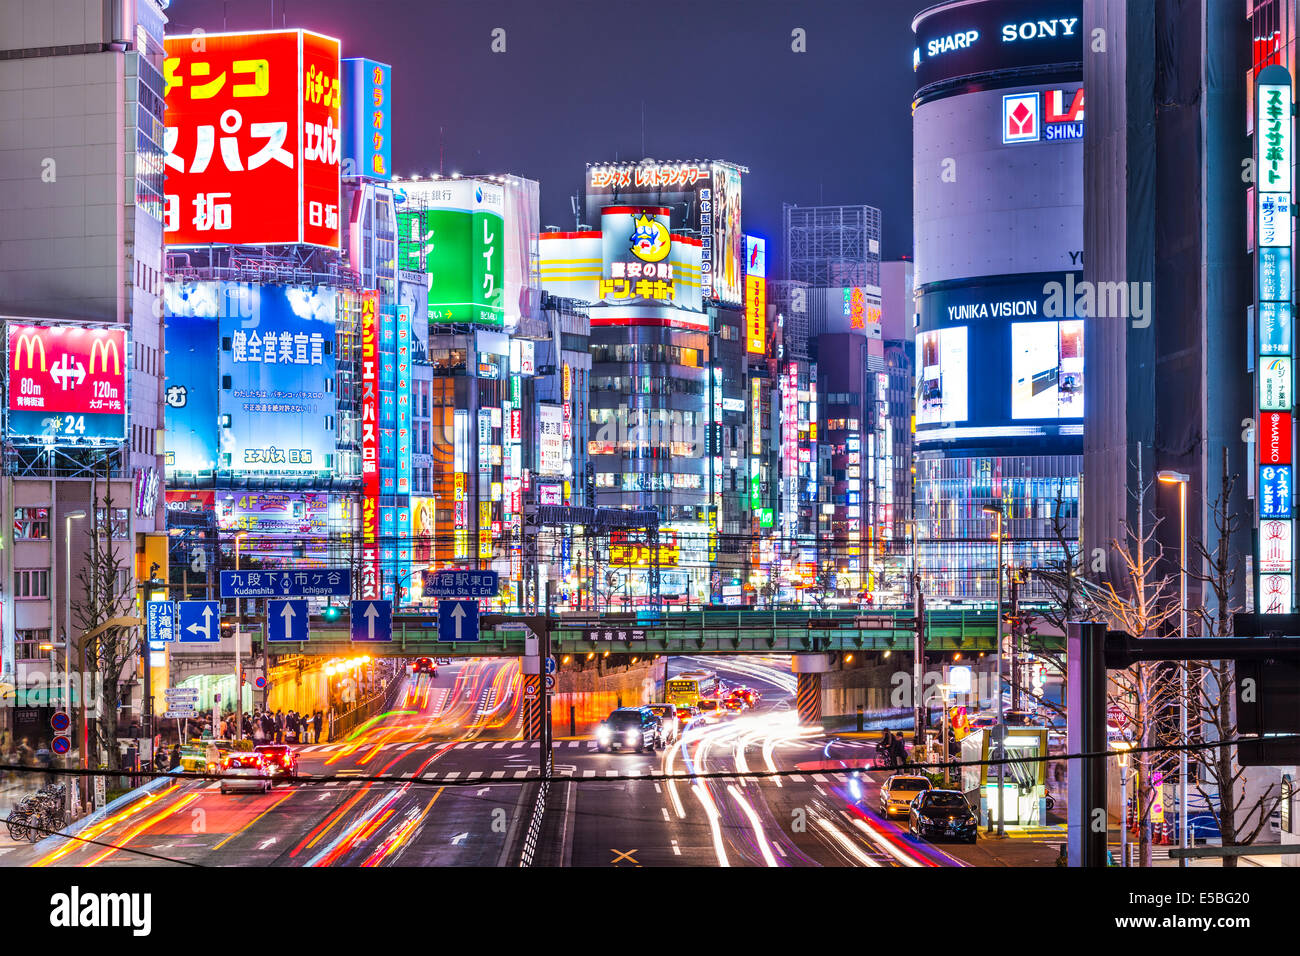 TOKYO, JAPAN - MARCH 19, 2014: Shinjuku district illuminated at night. The district is a renown night life center. Stock Photo